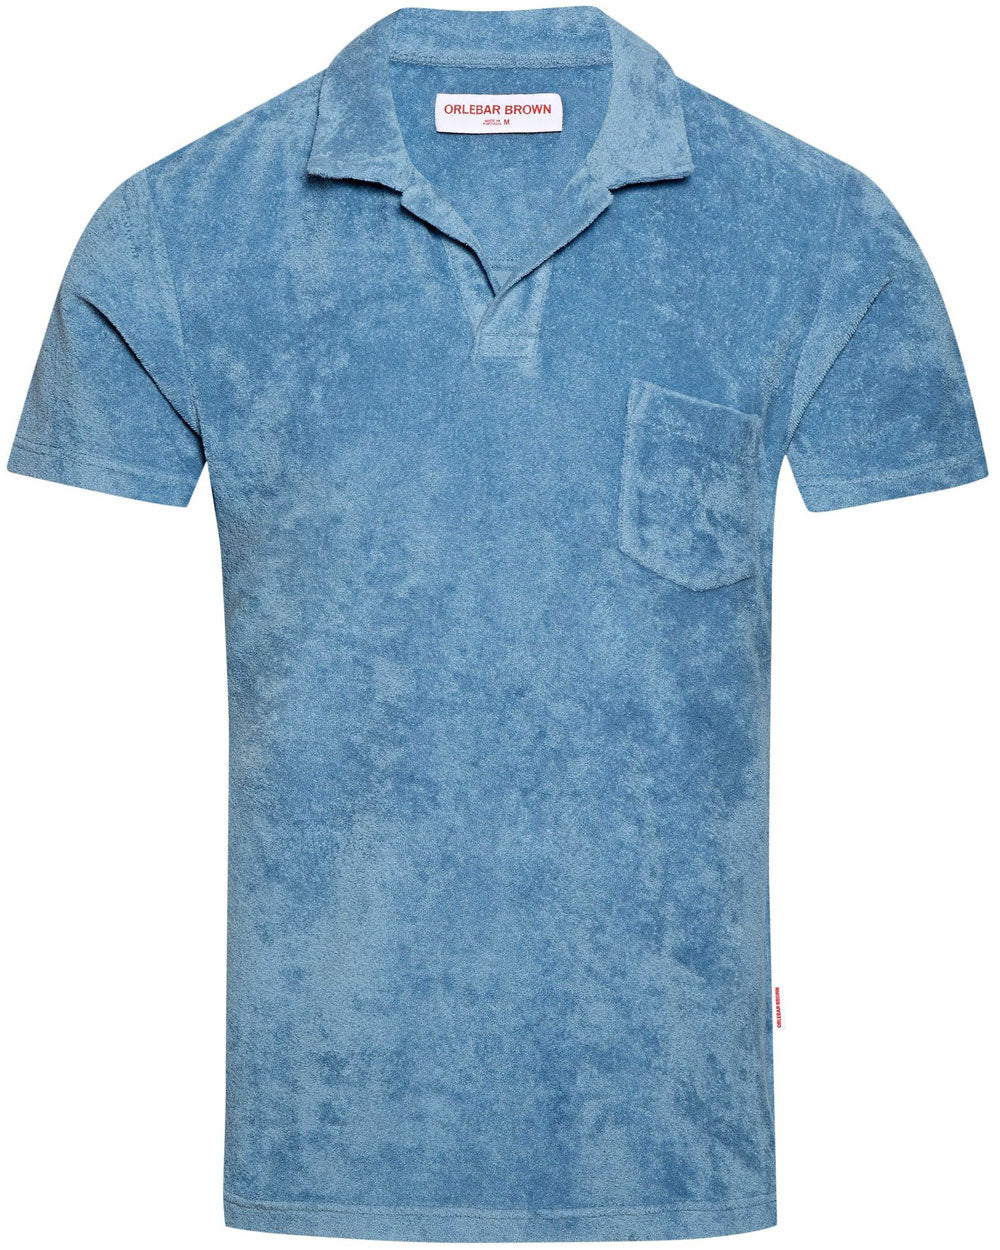 Terry Toweling Resort Polo Shirt in Capri Blue